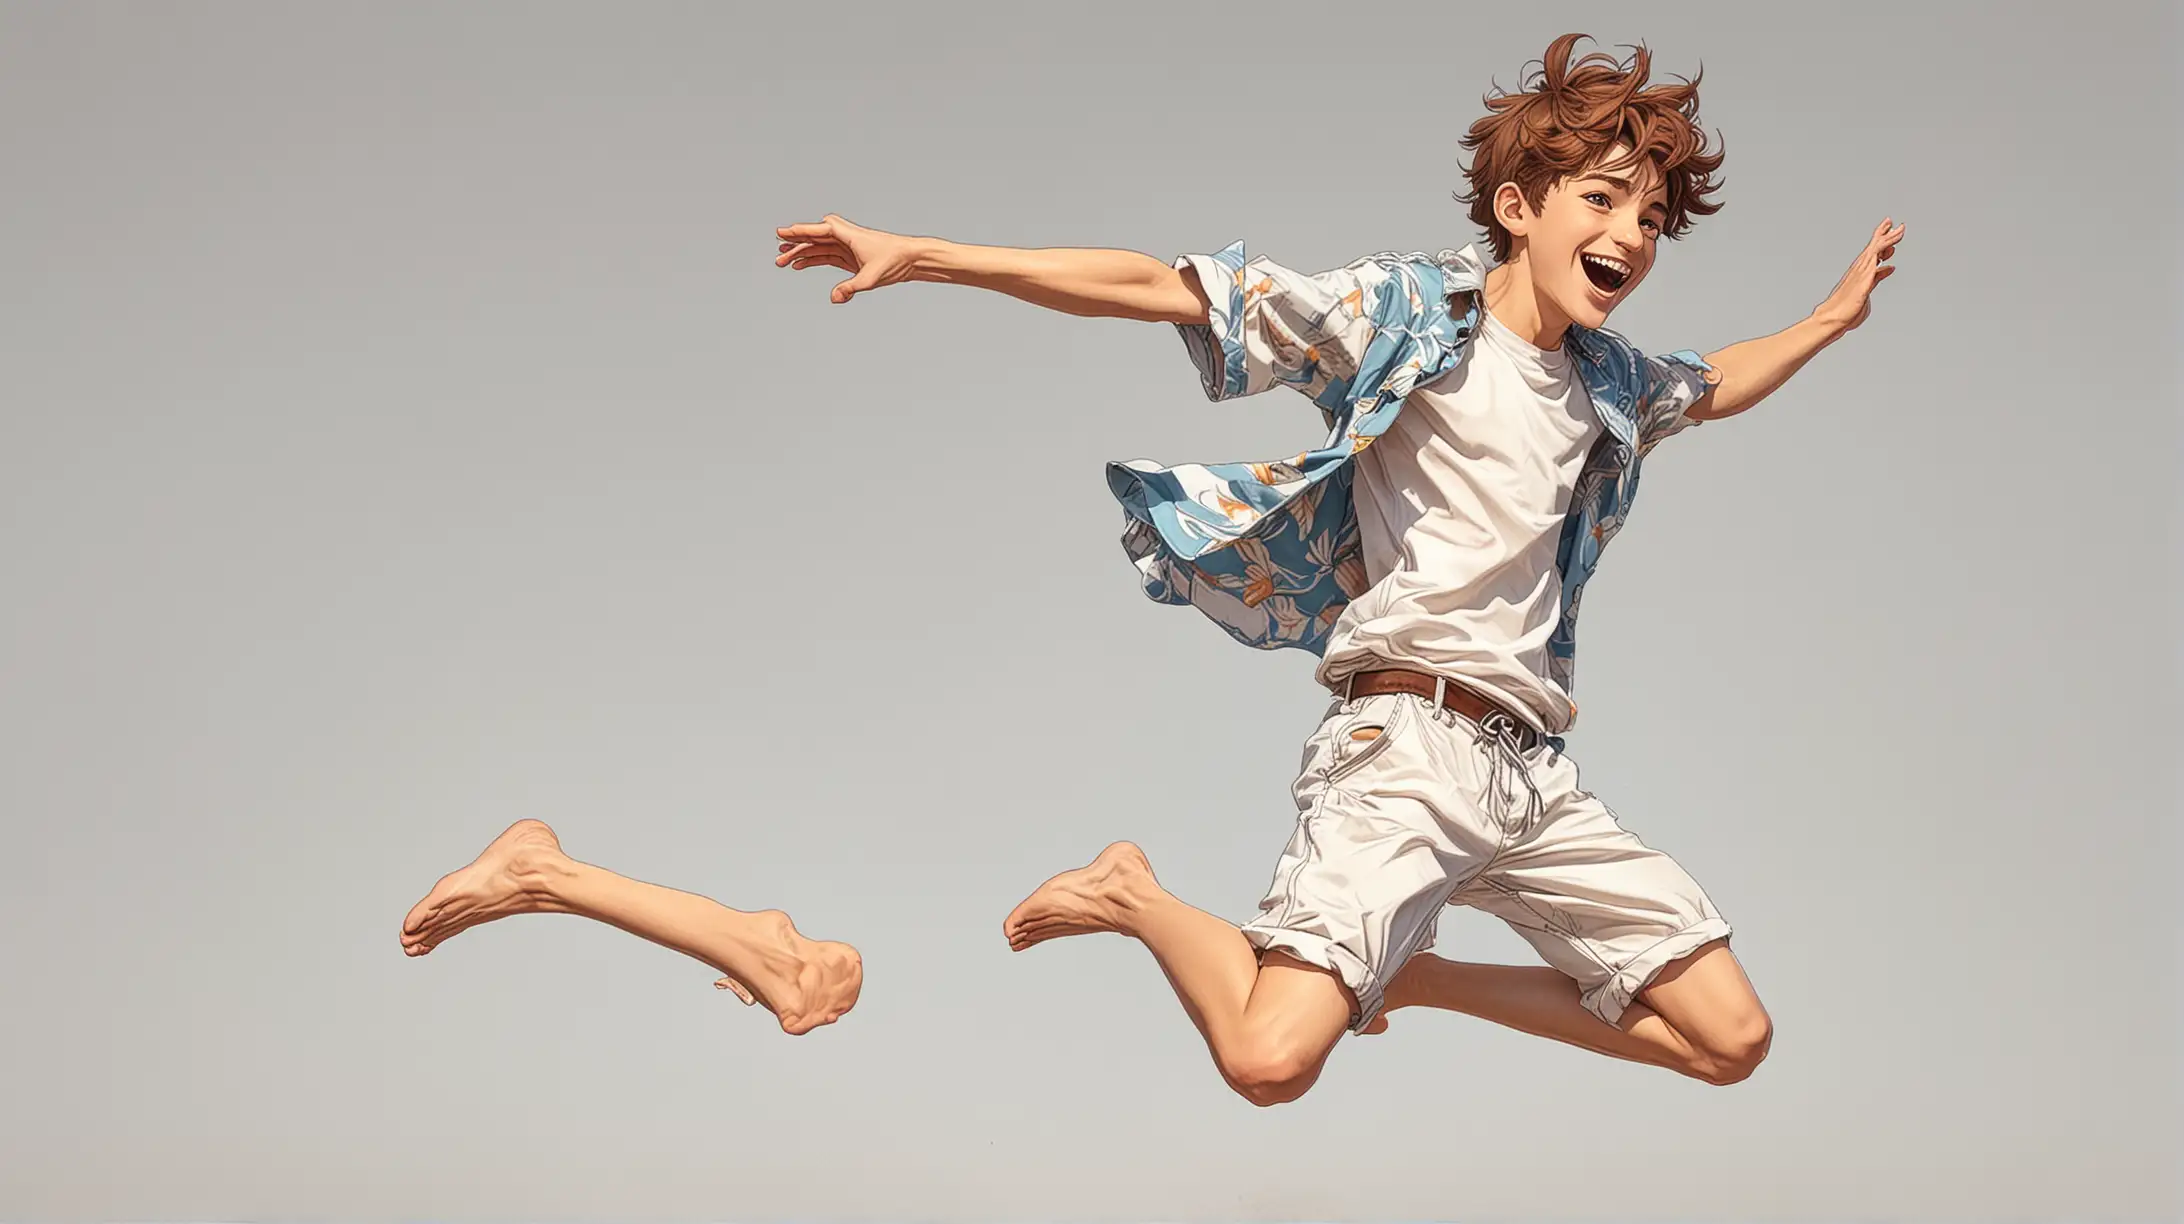 Handsome Teenage Boy Jumping in Summer Beach Clothes Anime Style